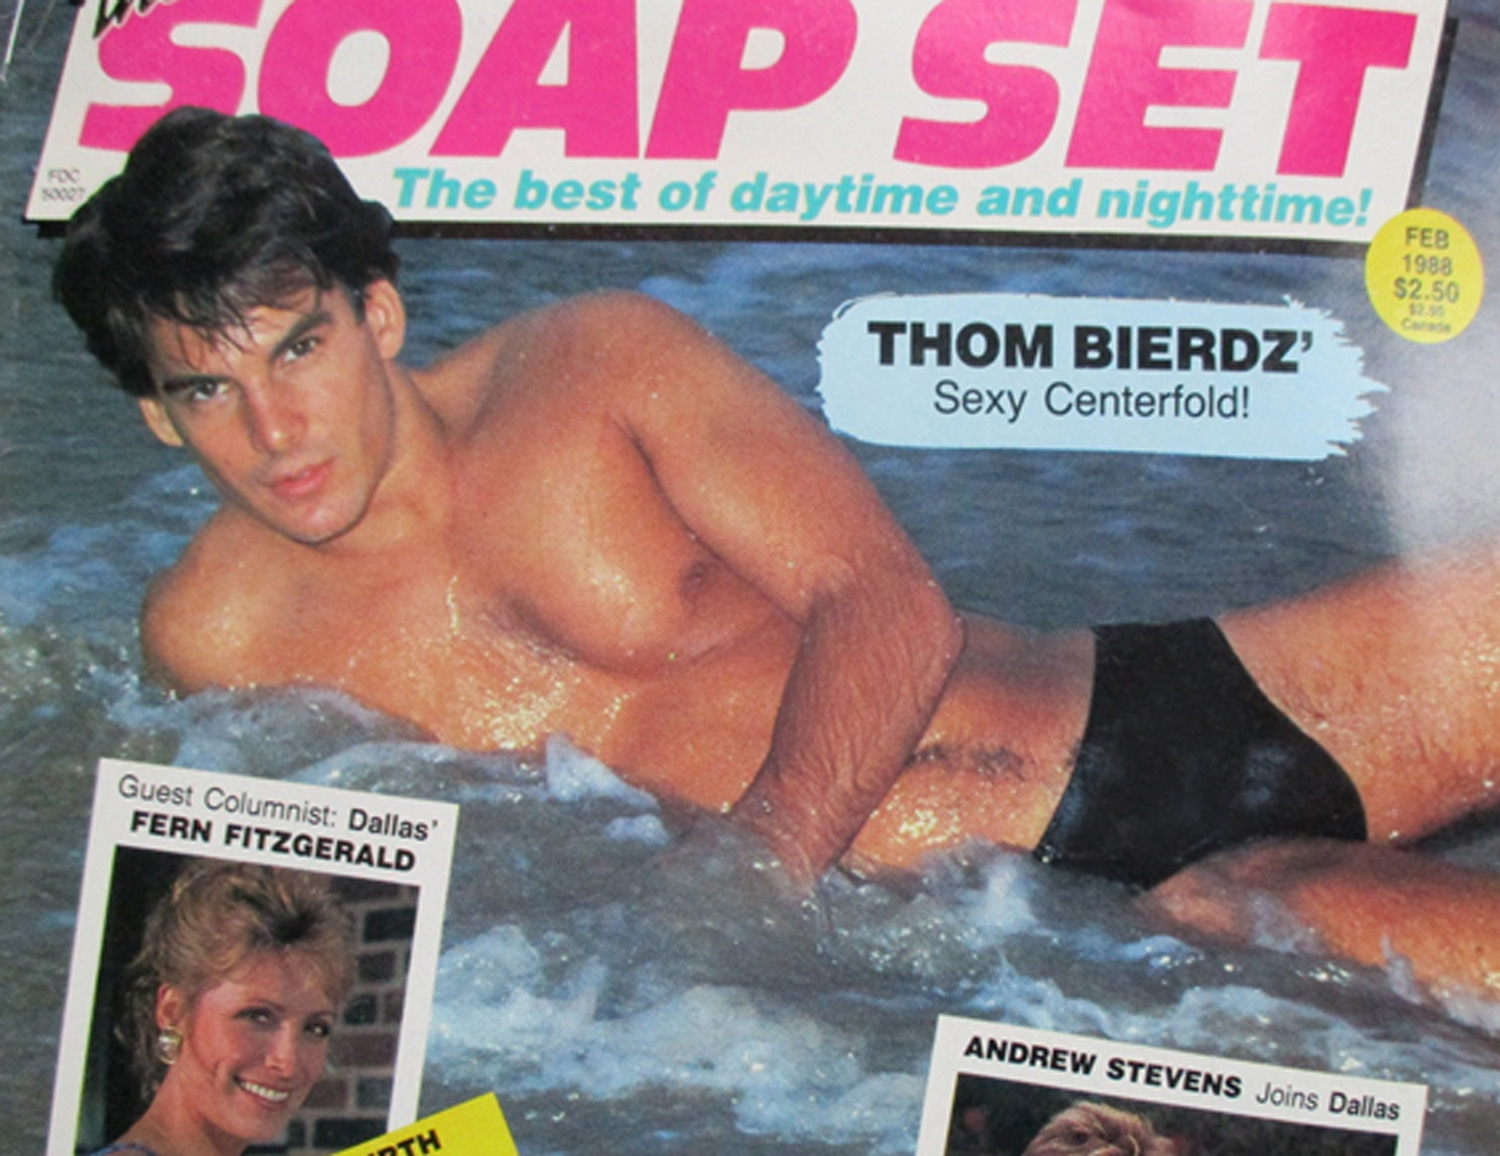 Nudist Family Gay Porn - This Soap Opera Actor Came Out as Gay in the Most Daytime TV ...